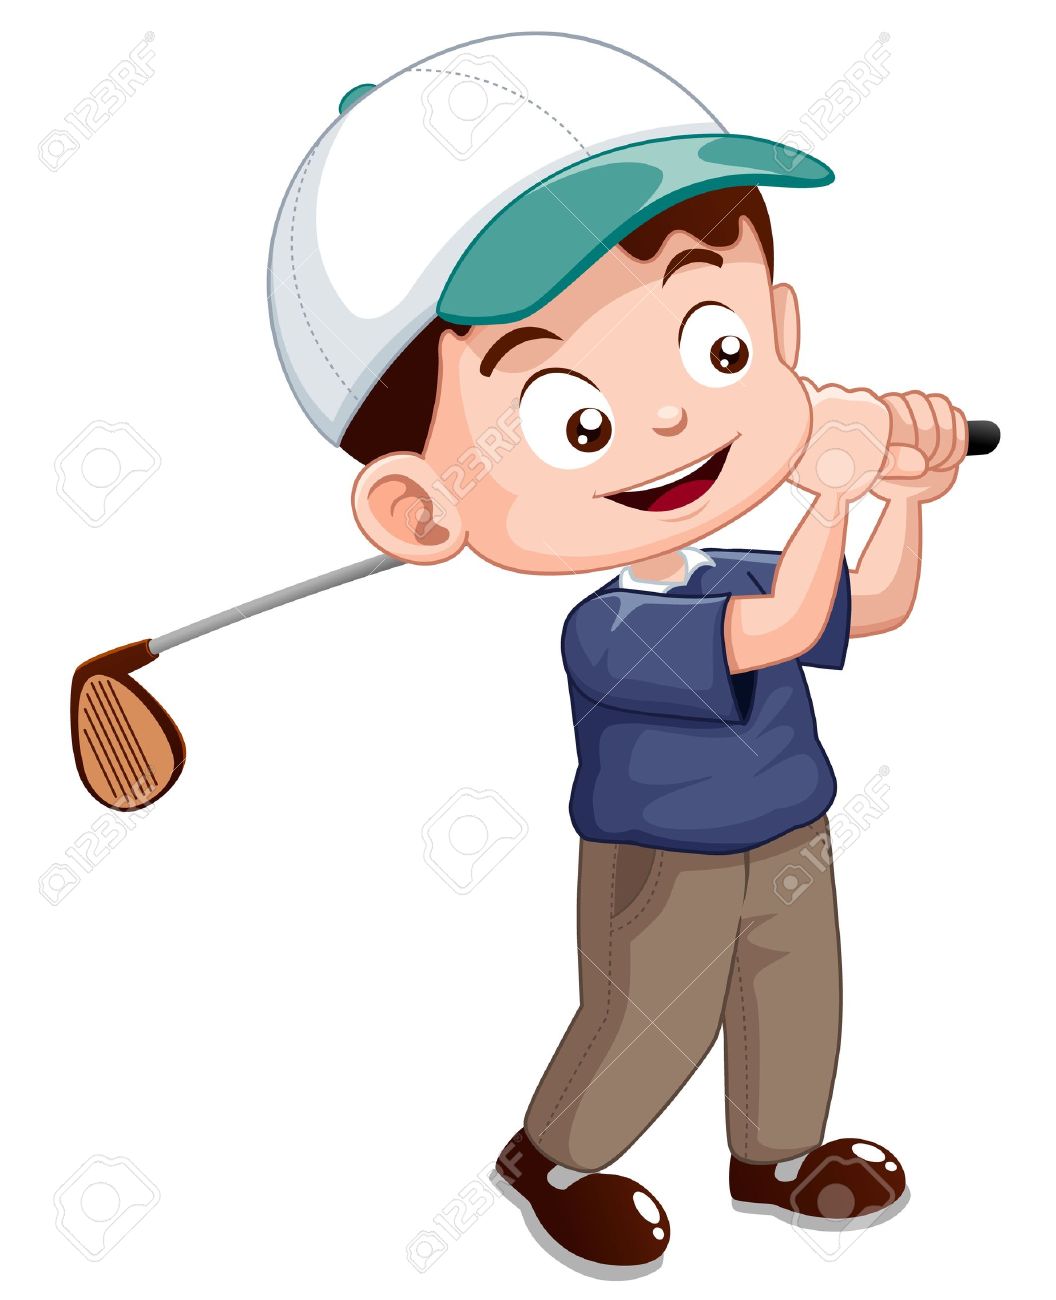 Pictures Of Cartoon Golfers